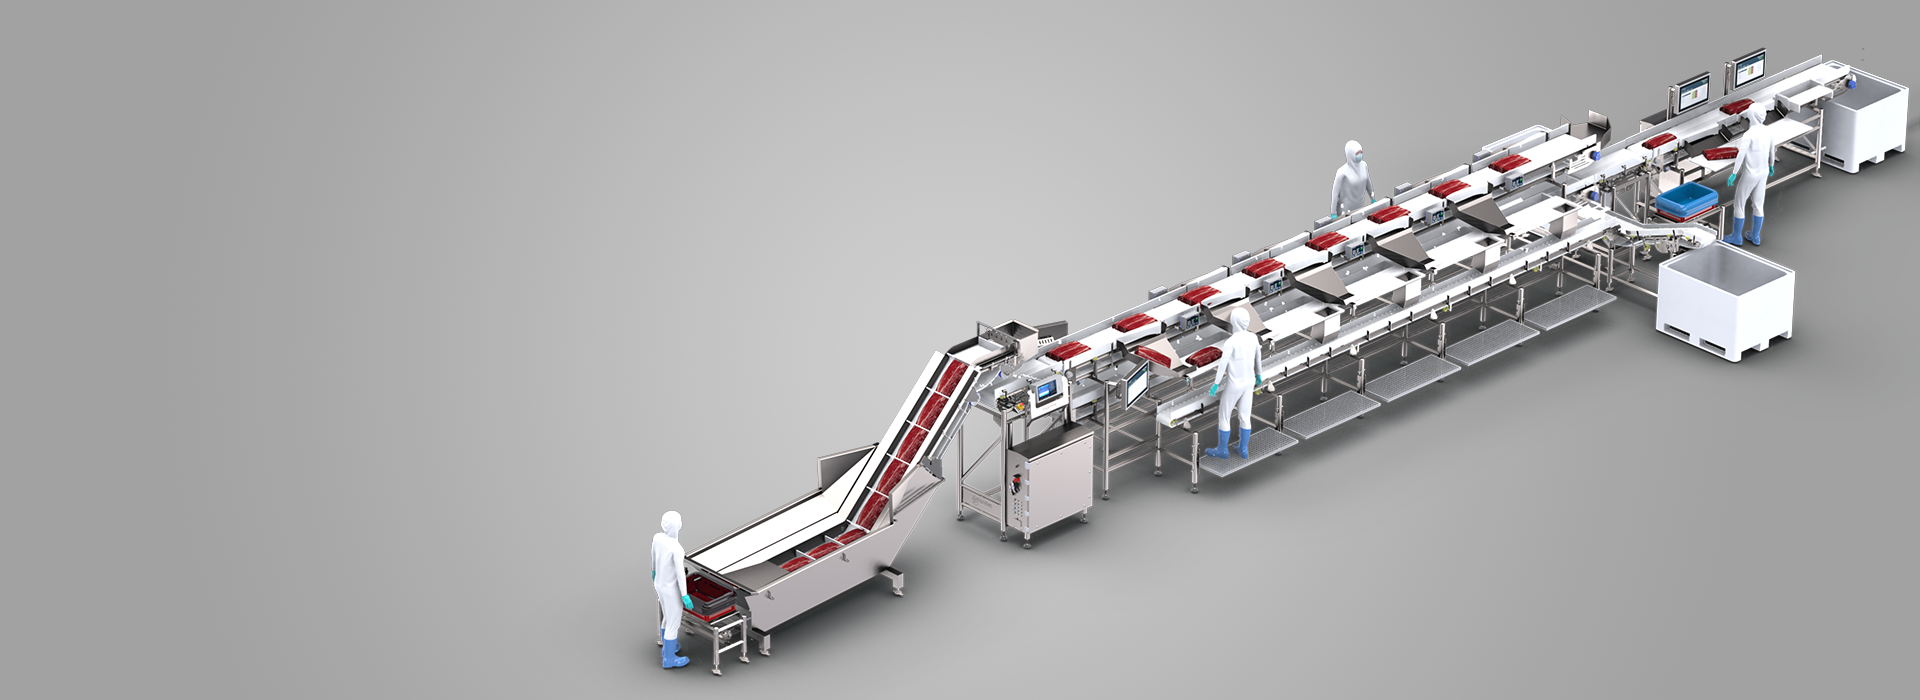 Intelligent meat trimming line monitoring of live yield, capacity and quality per operator